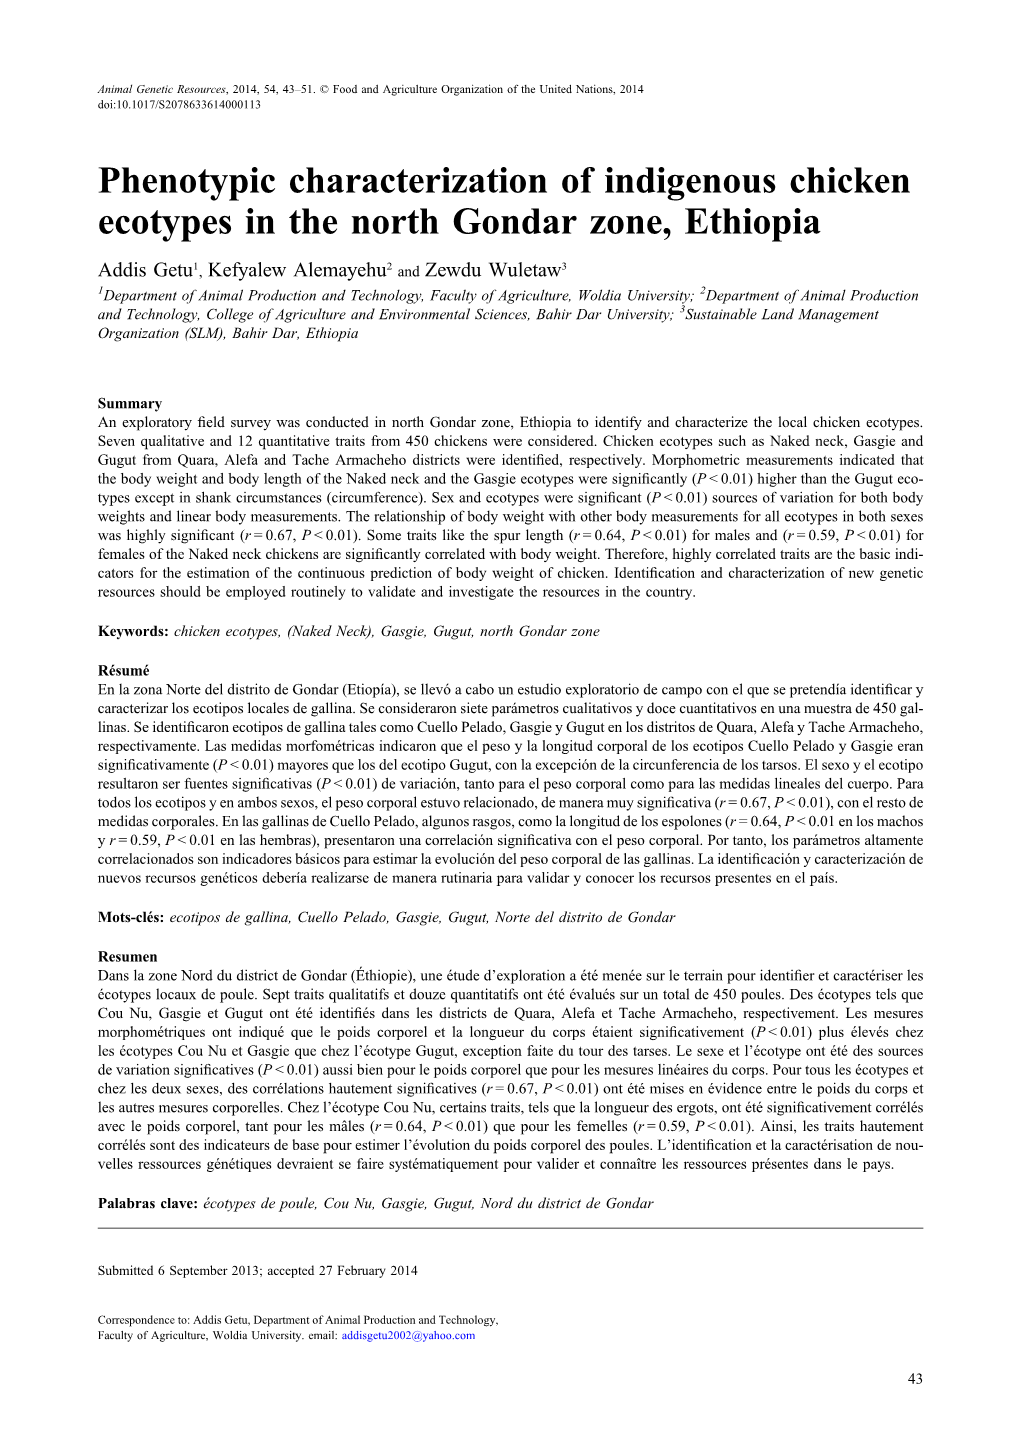 Phenotypic Characterization of Indigenous Chicken Ecotypes in the North Gondar Zone, Ethiopia